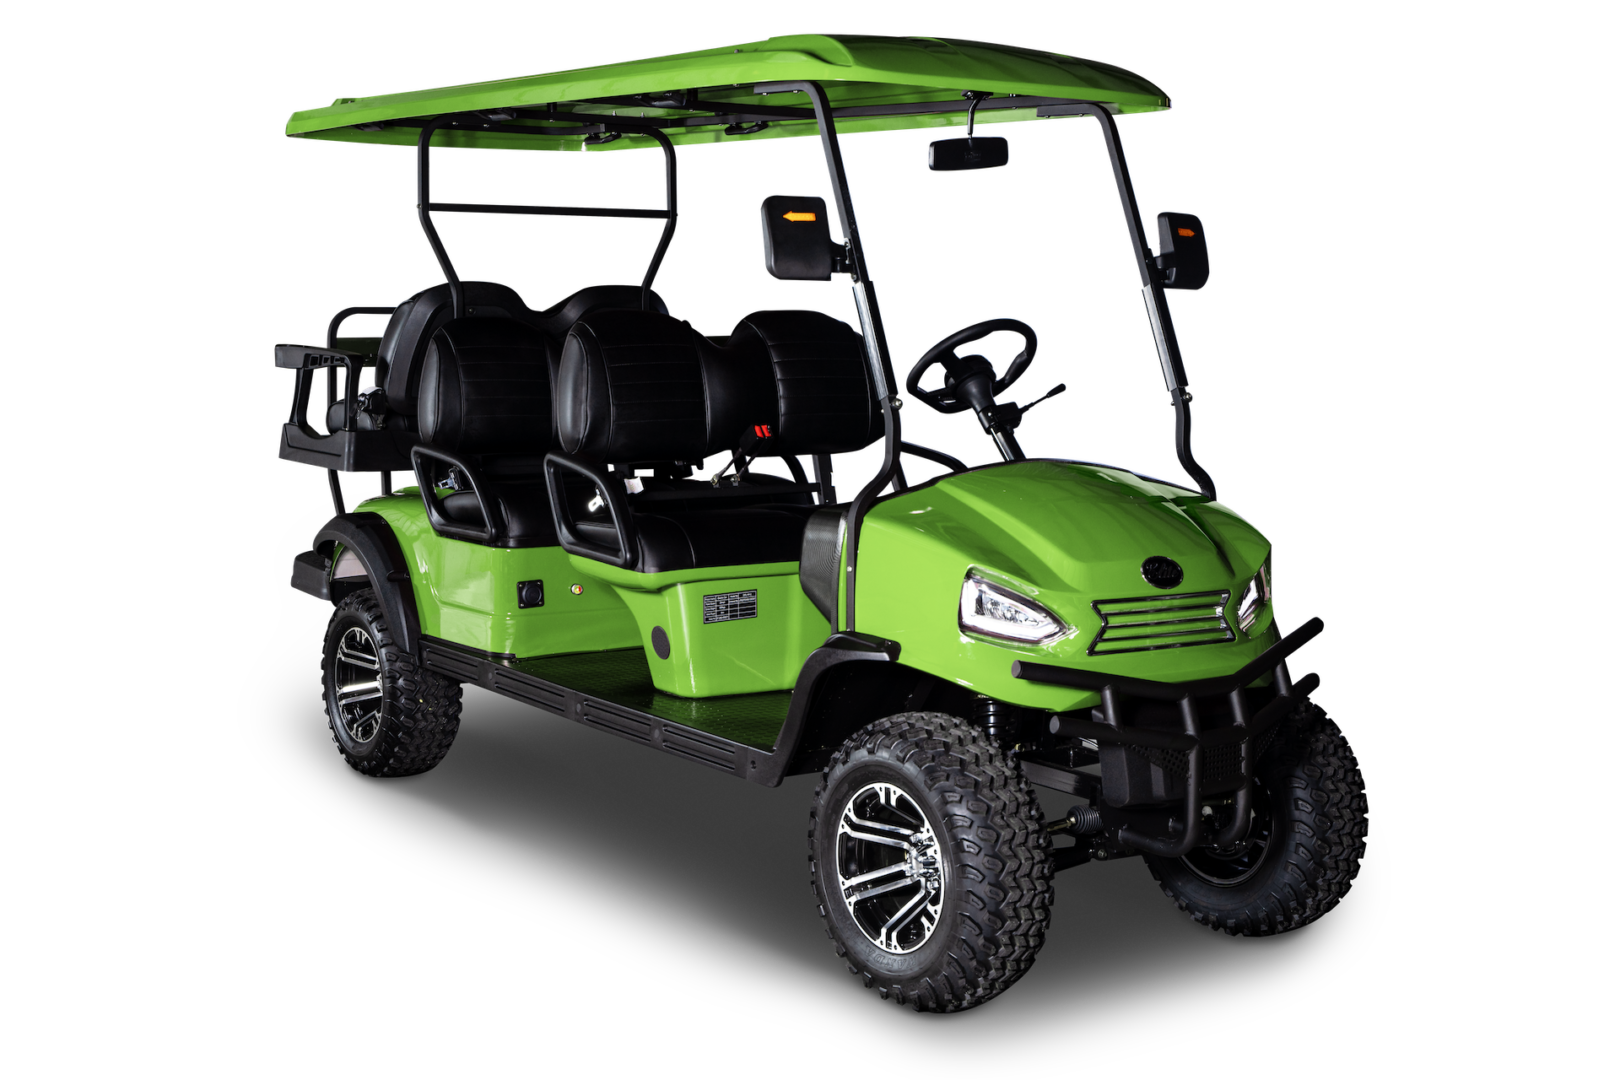 A green golf cart is shown in this picture.